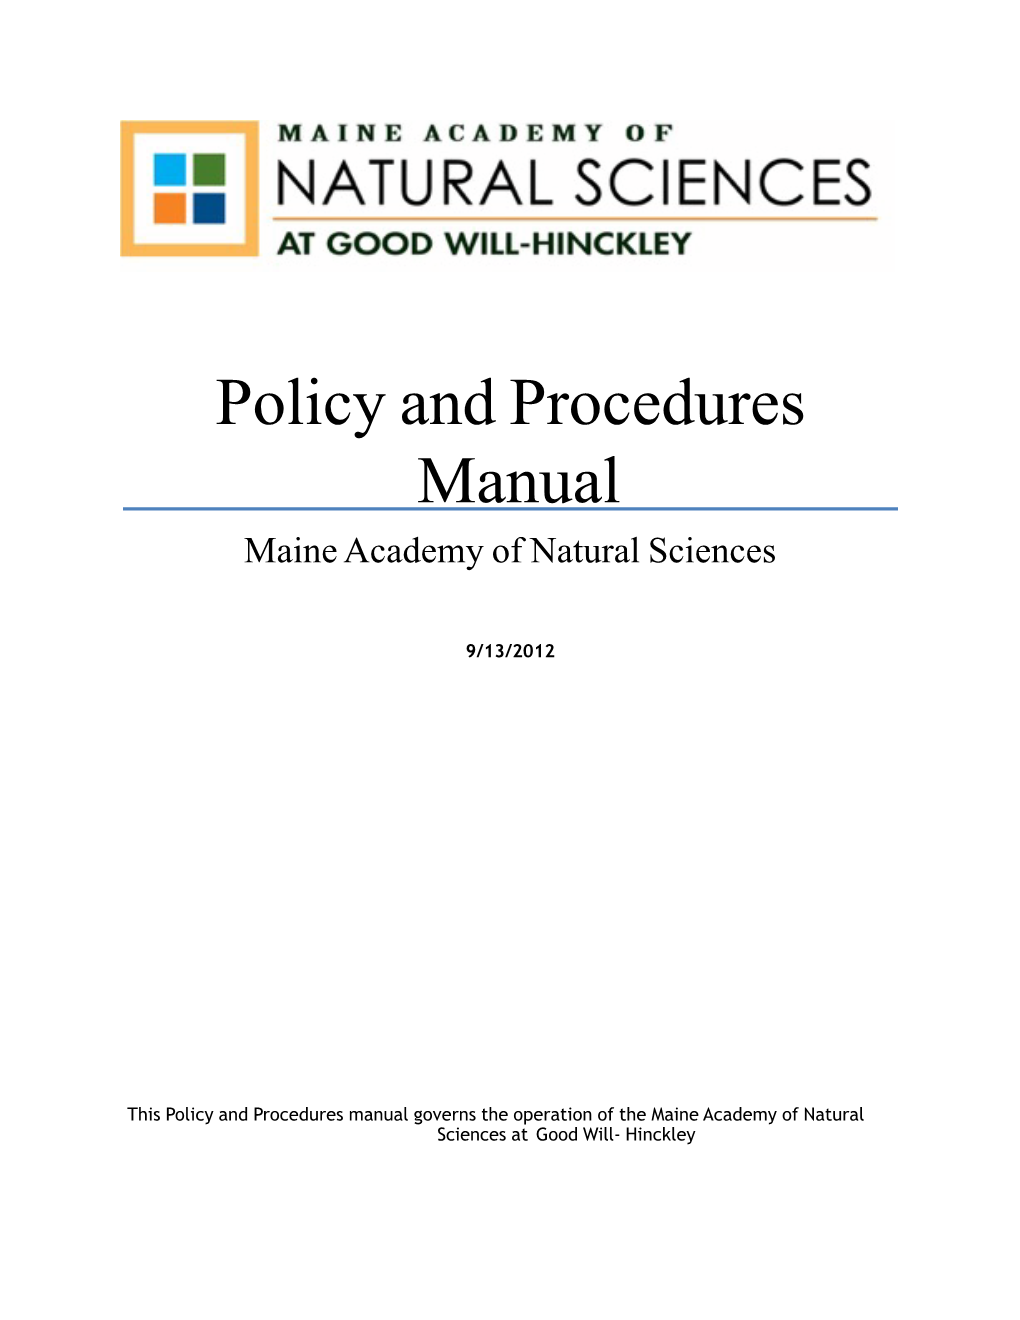 Sept-2012 Means Policy and Procedures Manual